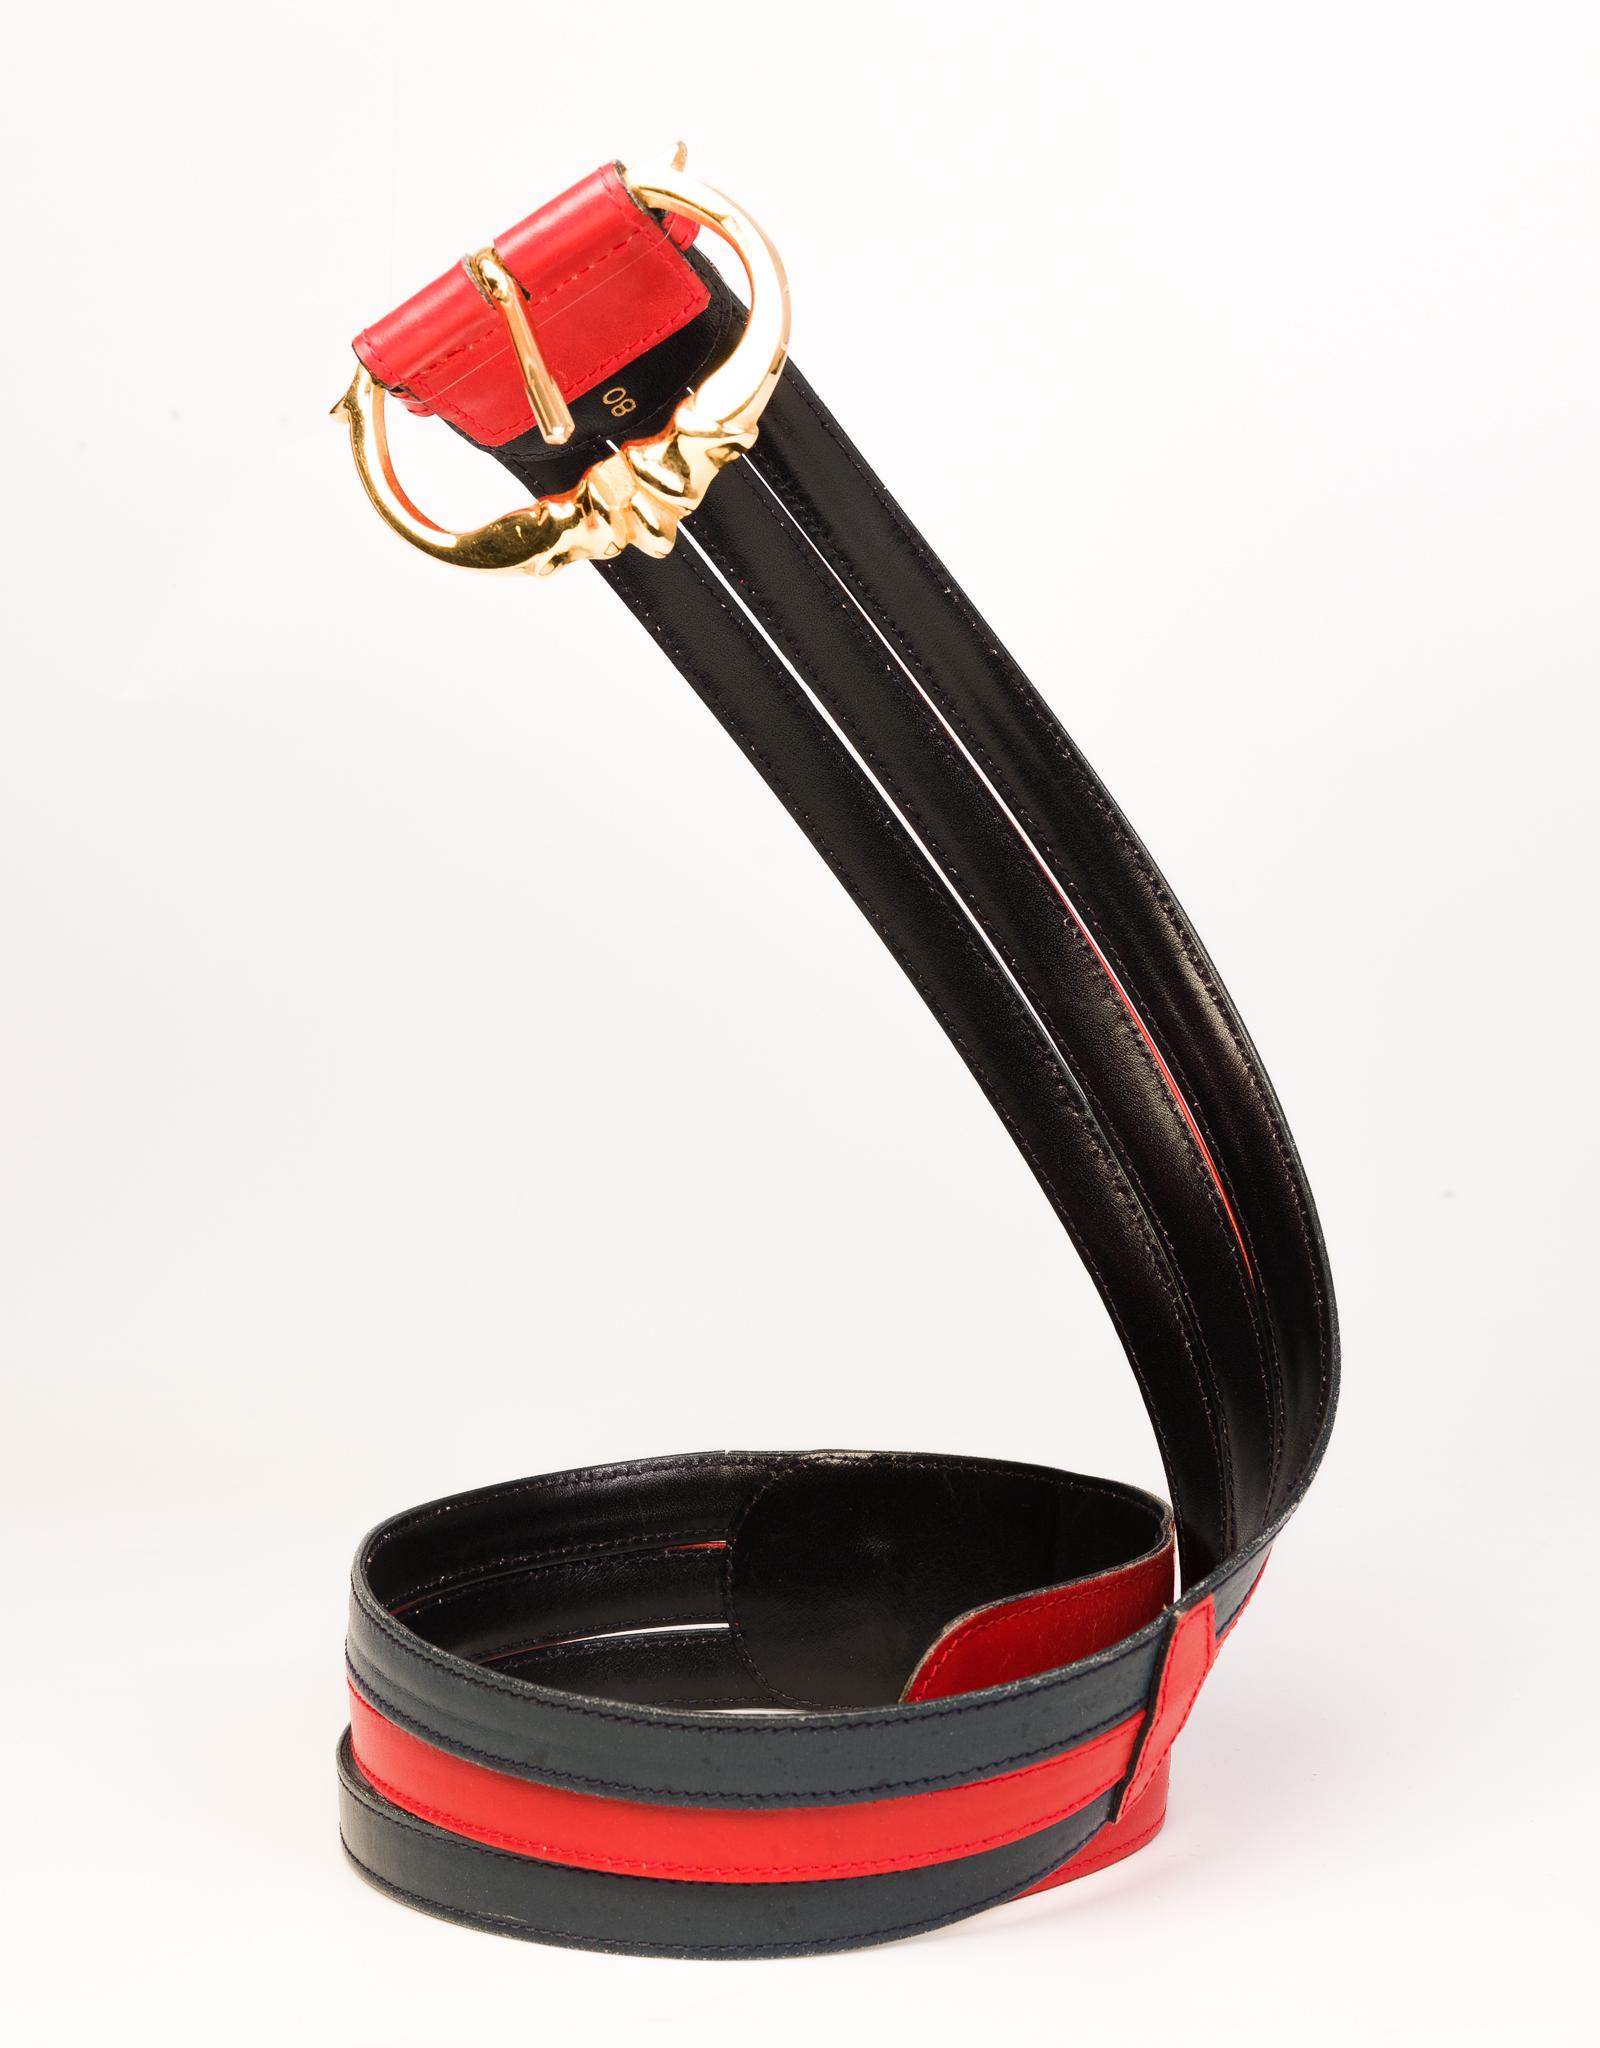 Celine bi-color belt made with 100% calfskin leather a gold-tone metal emblematic Camarat buckle. This is a high-waist belt. 

COLOR: Navy and red
ITEM CODE: M07
MATERIAL: Leather
MEASURES: L 33.5” x W 1.5